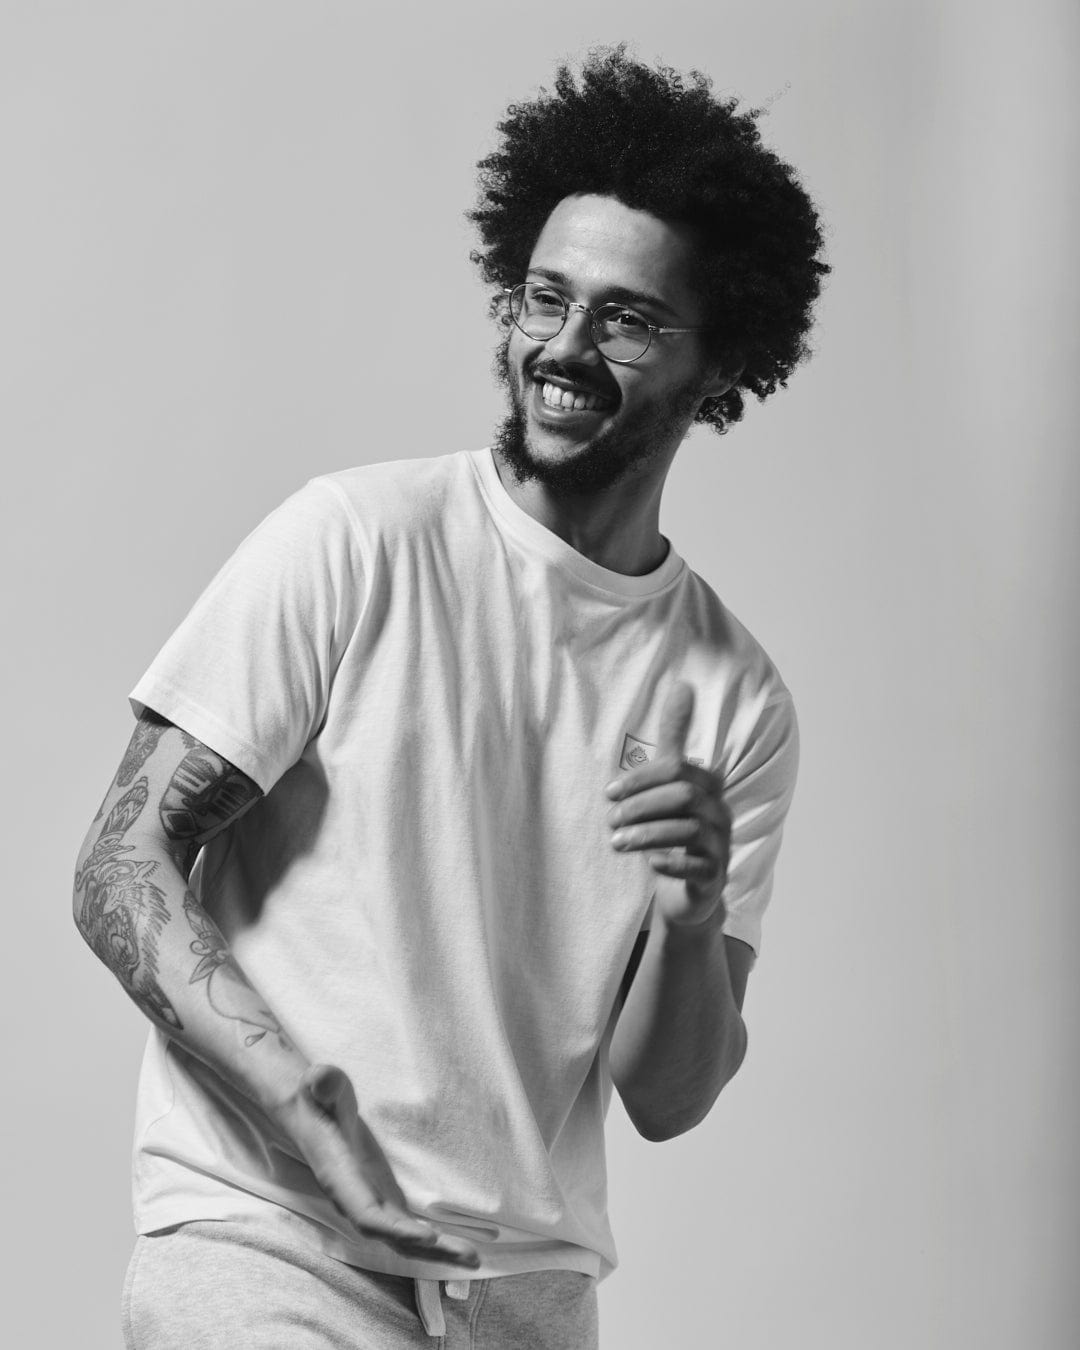 A black and white photo of a smiling man with an afro hairstyle and a tattoo on his left arm, wearing a Saltrock Original - Mens Short Sleeve T-Shirt in Lilac made from lightweight material and sweatpants, appearing to be in mid m